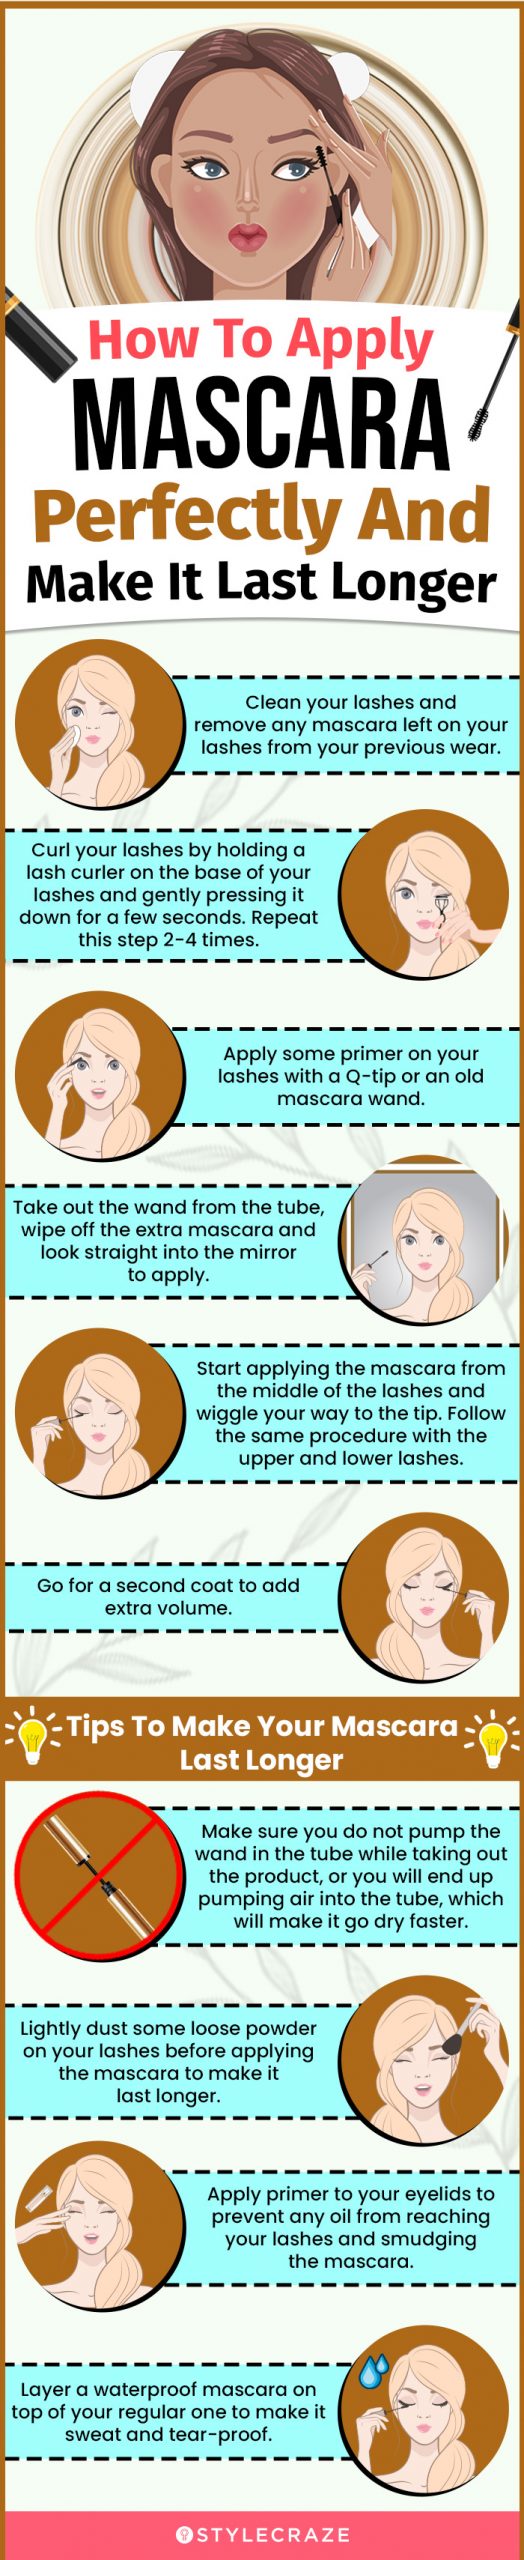 How To Wear Mascara Perfectly and Tips To Make It Last Longer (infographic)